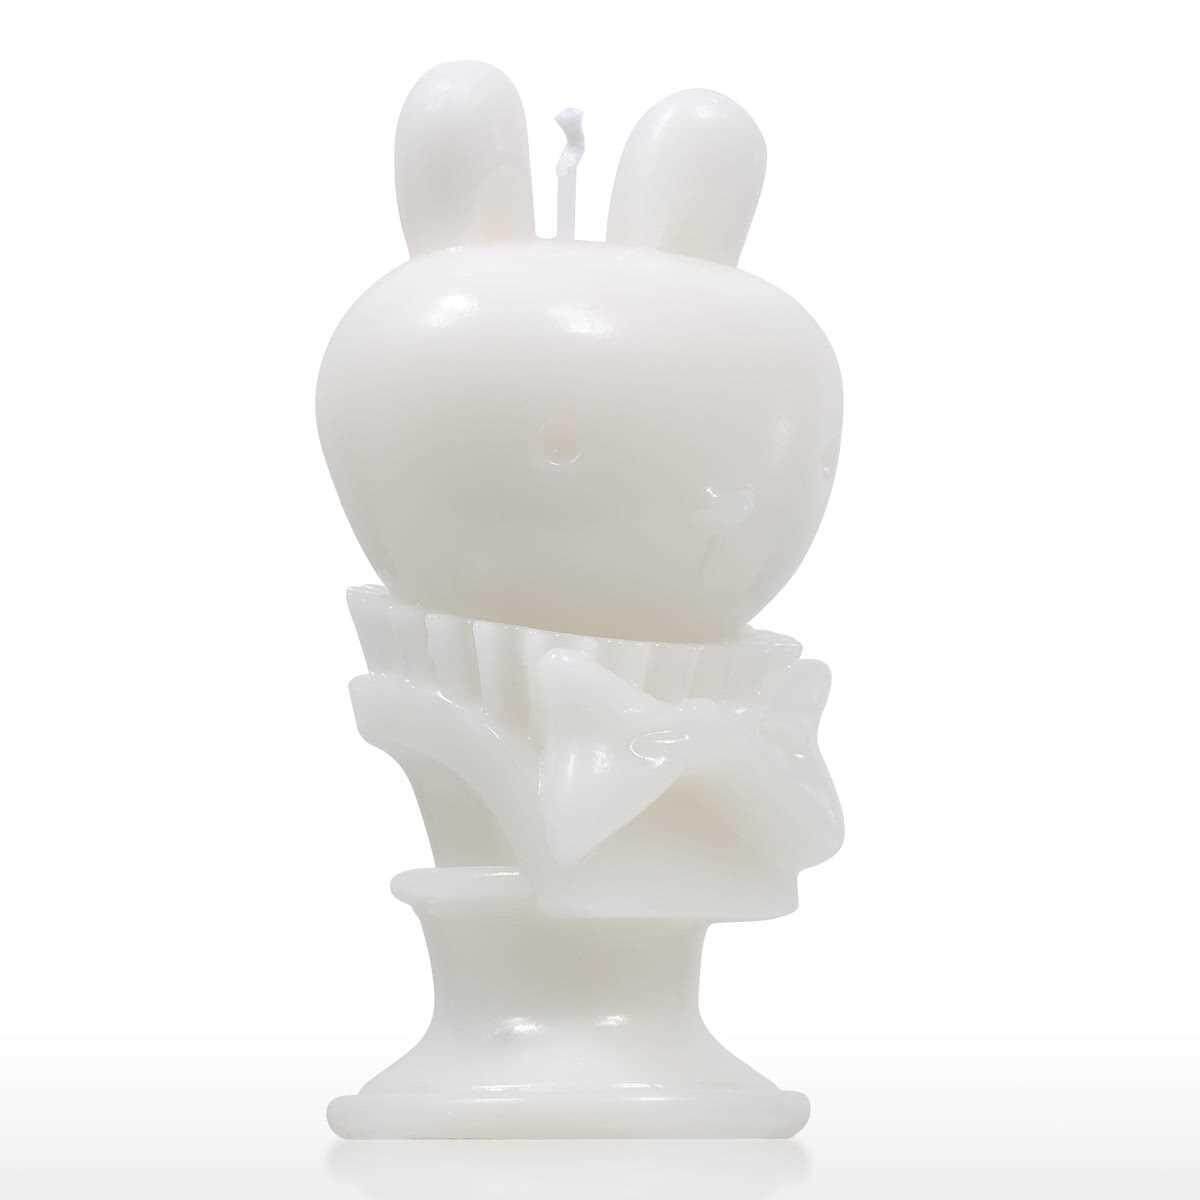 Scented Candle - White Rabbit Decorative Aromatherapy Wax Natural Cotton Wick (white)